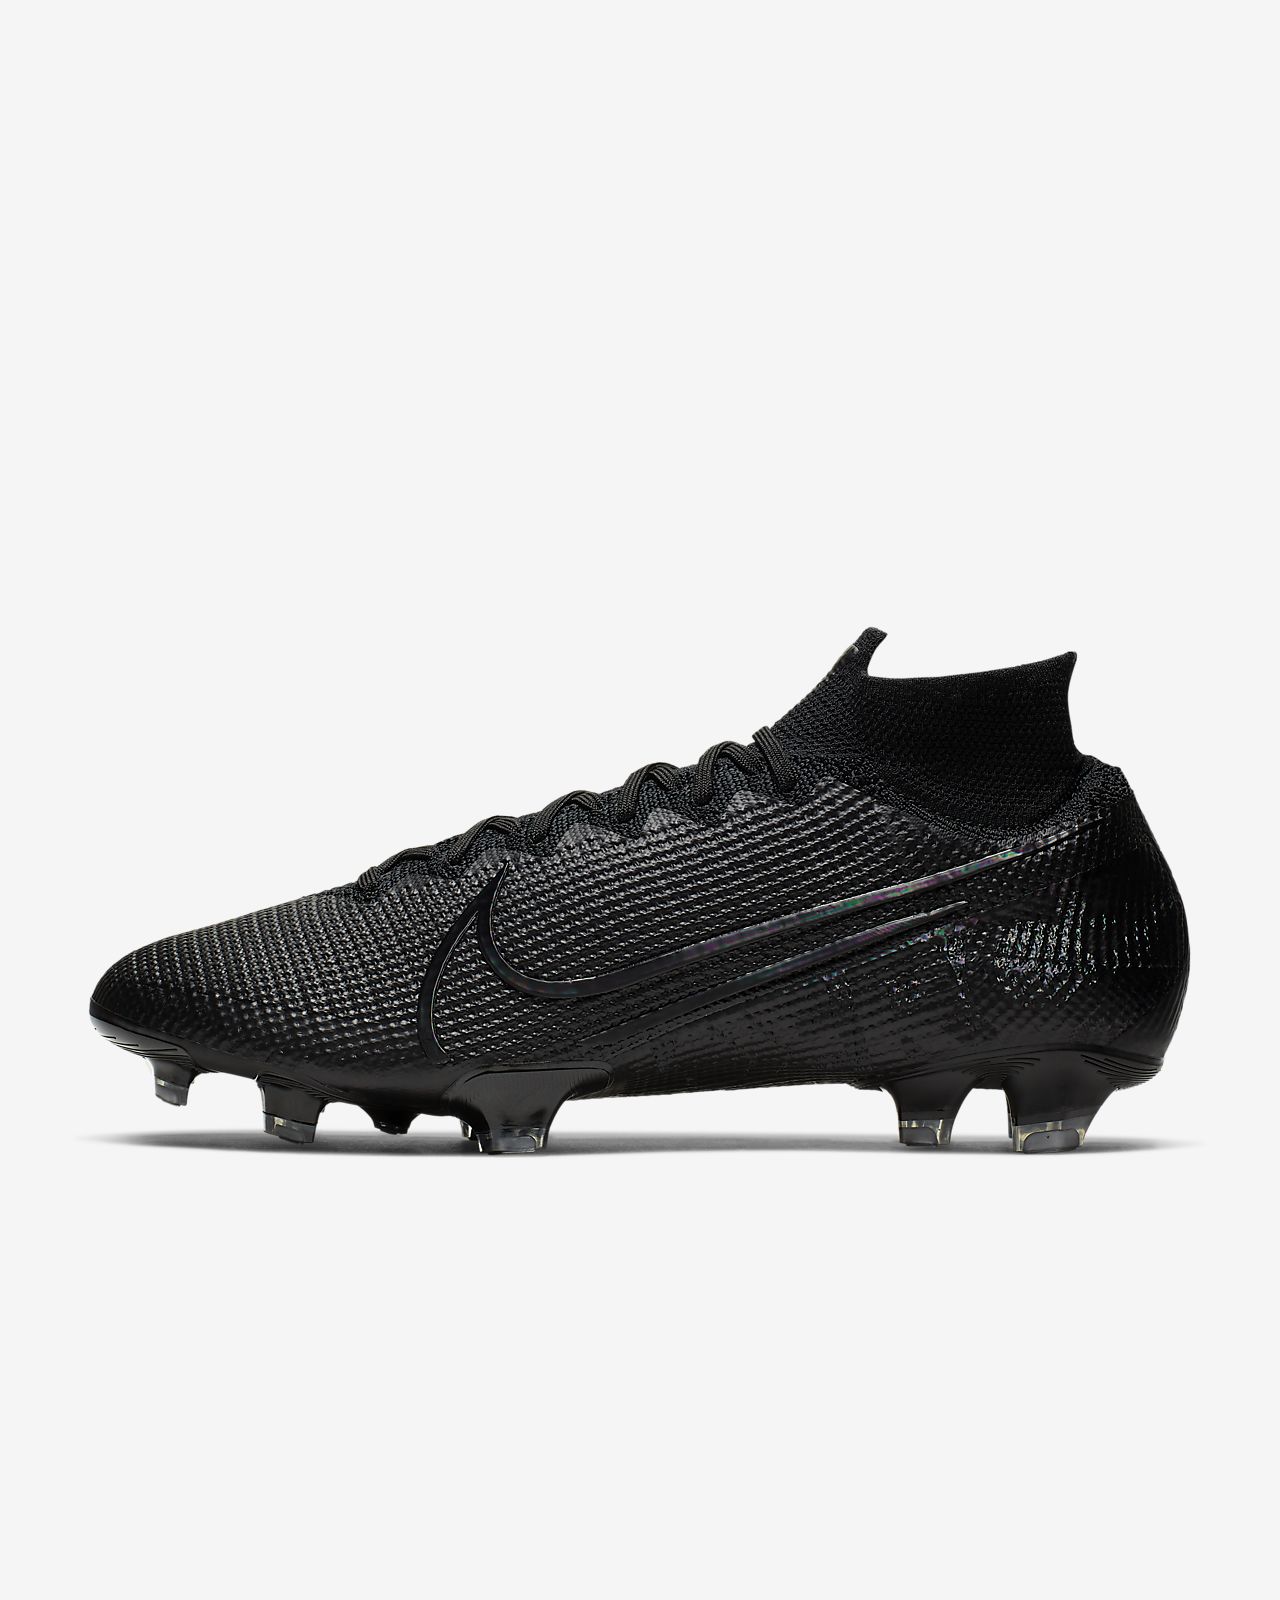 new mercurial superfly 7